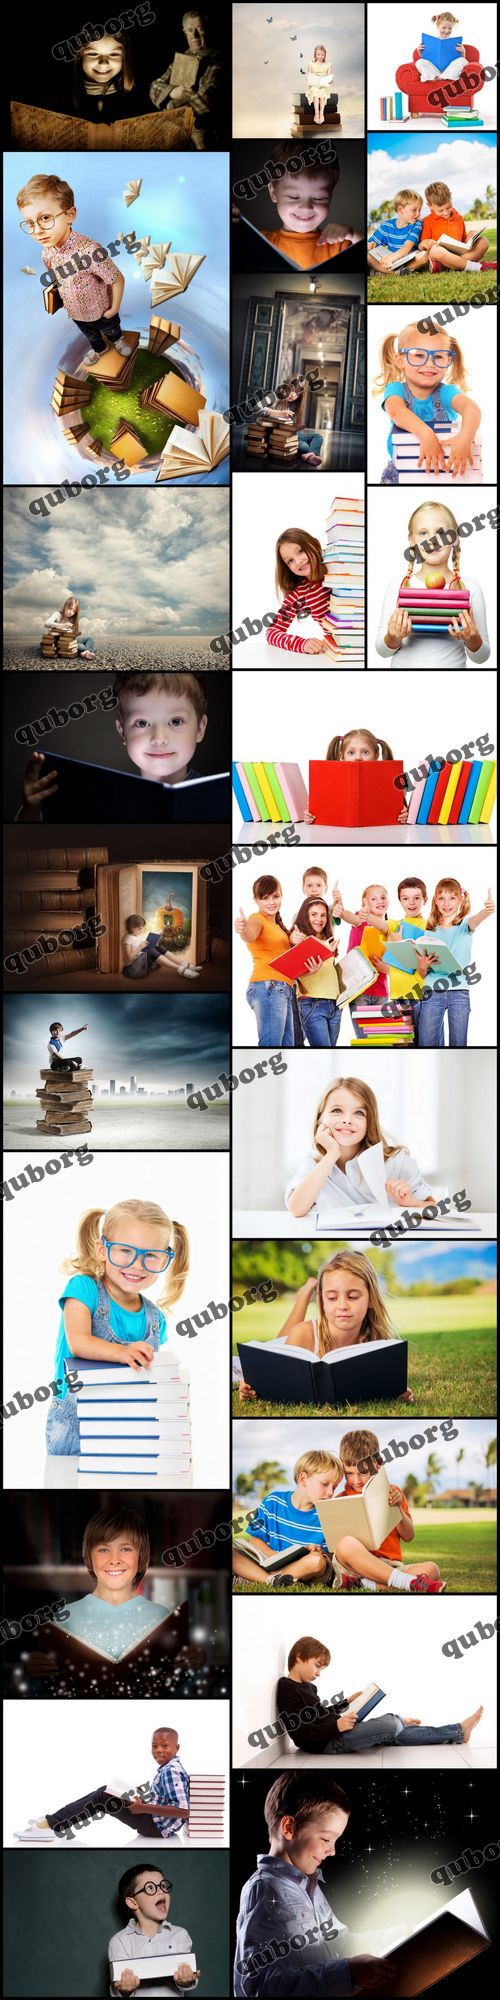 Stock Photos - Children With Book